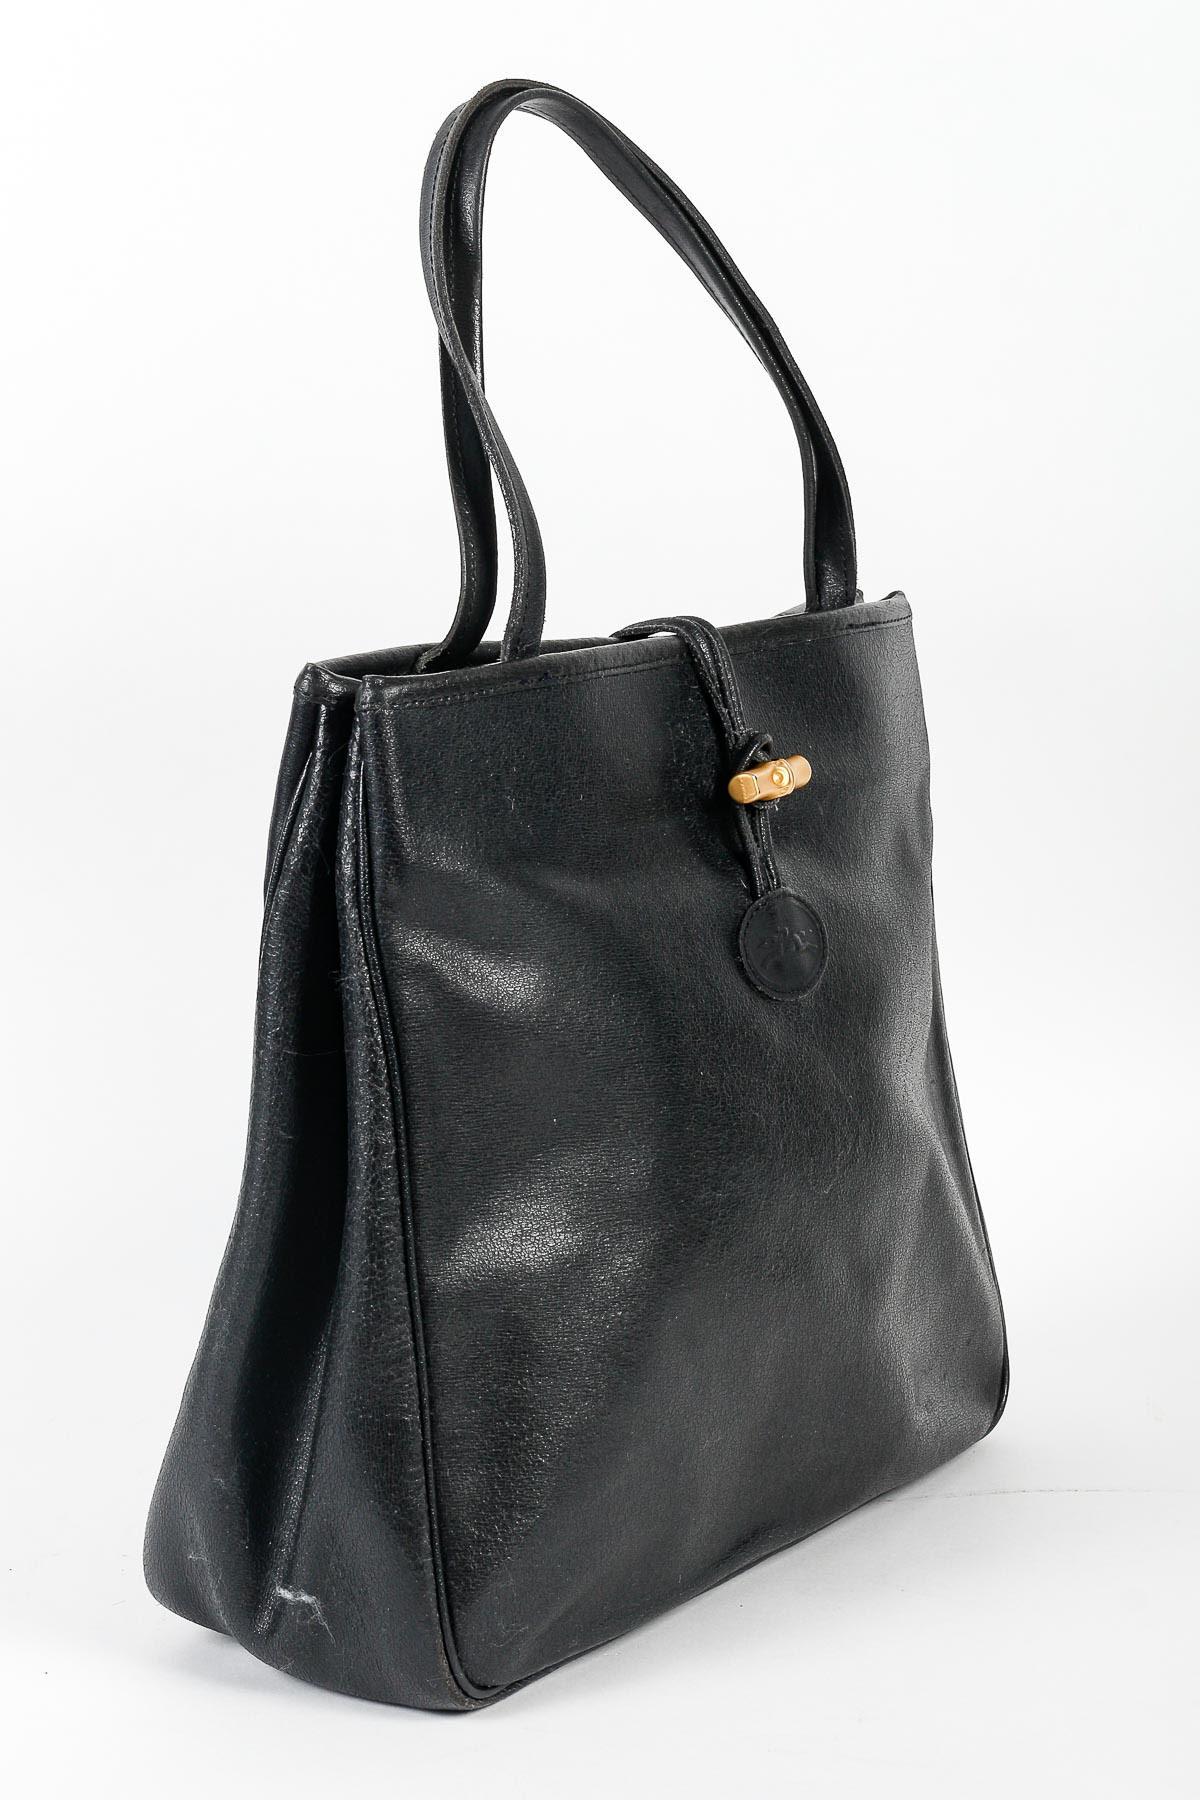 Vintage Handbag, Longchamp, Black Leather, XXth century.

Handbag by Longchamp, black leather, bamboo style gold buckle, leather cracked by time on the front, XXth century.    
h: 29cm , w: 32cm, d: 11cm